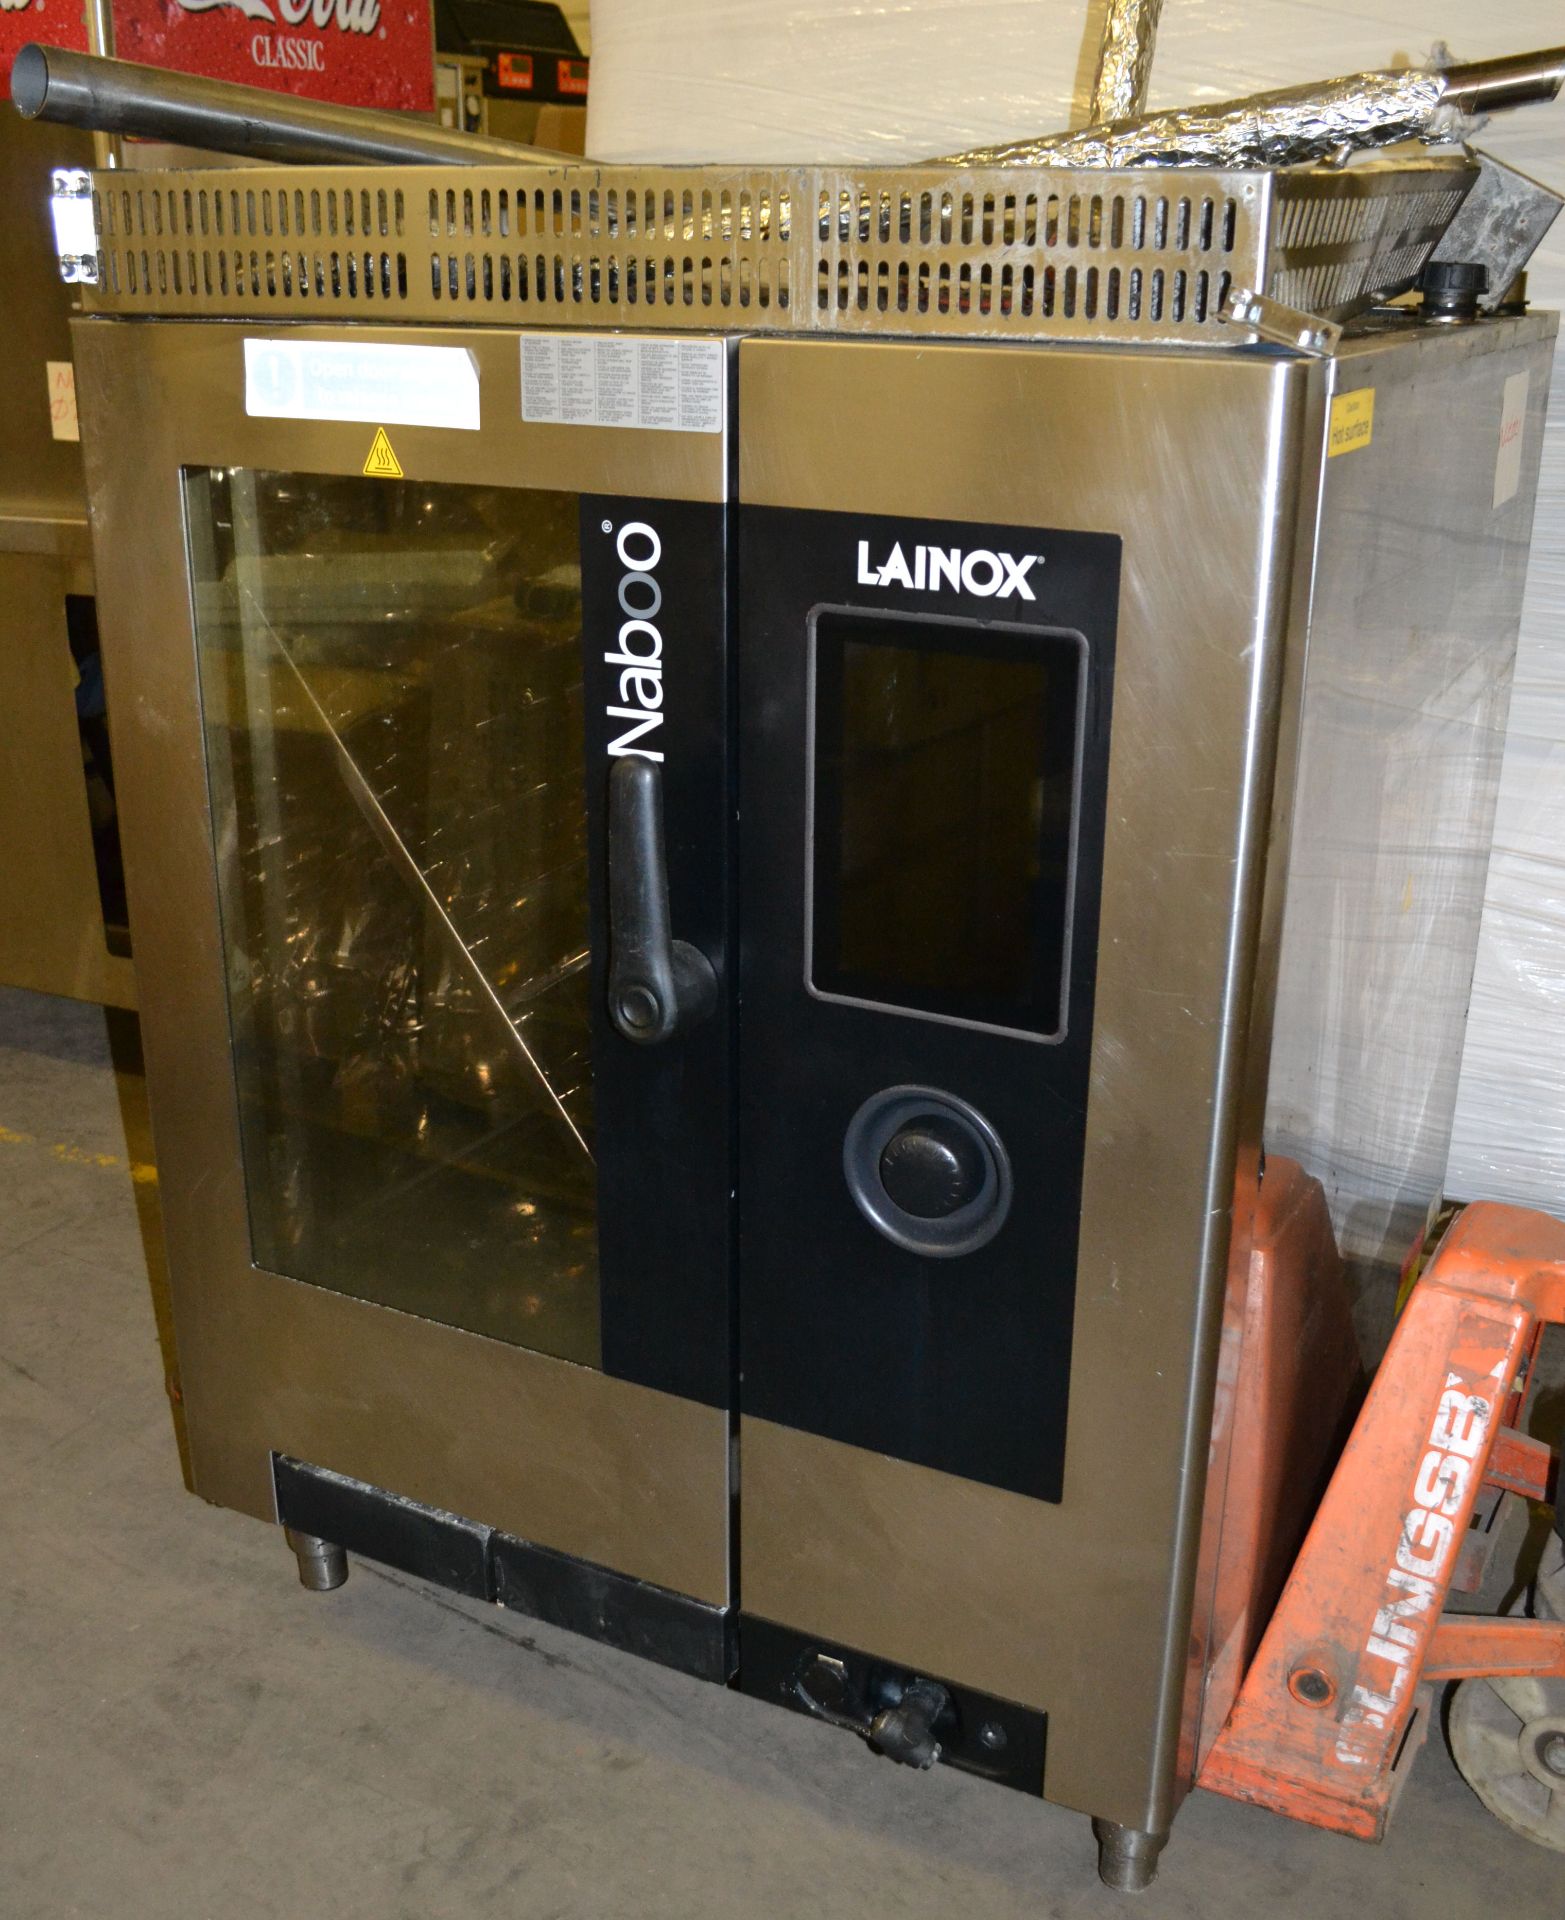 1 x Lainox Naboo NAGB101 Gas Combination Oven RRP £15,600 - Ref:NCE021 - CL007 - Location: Bolton